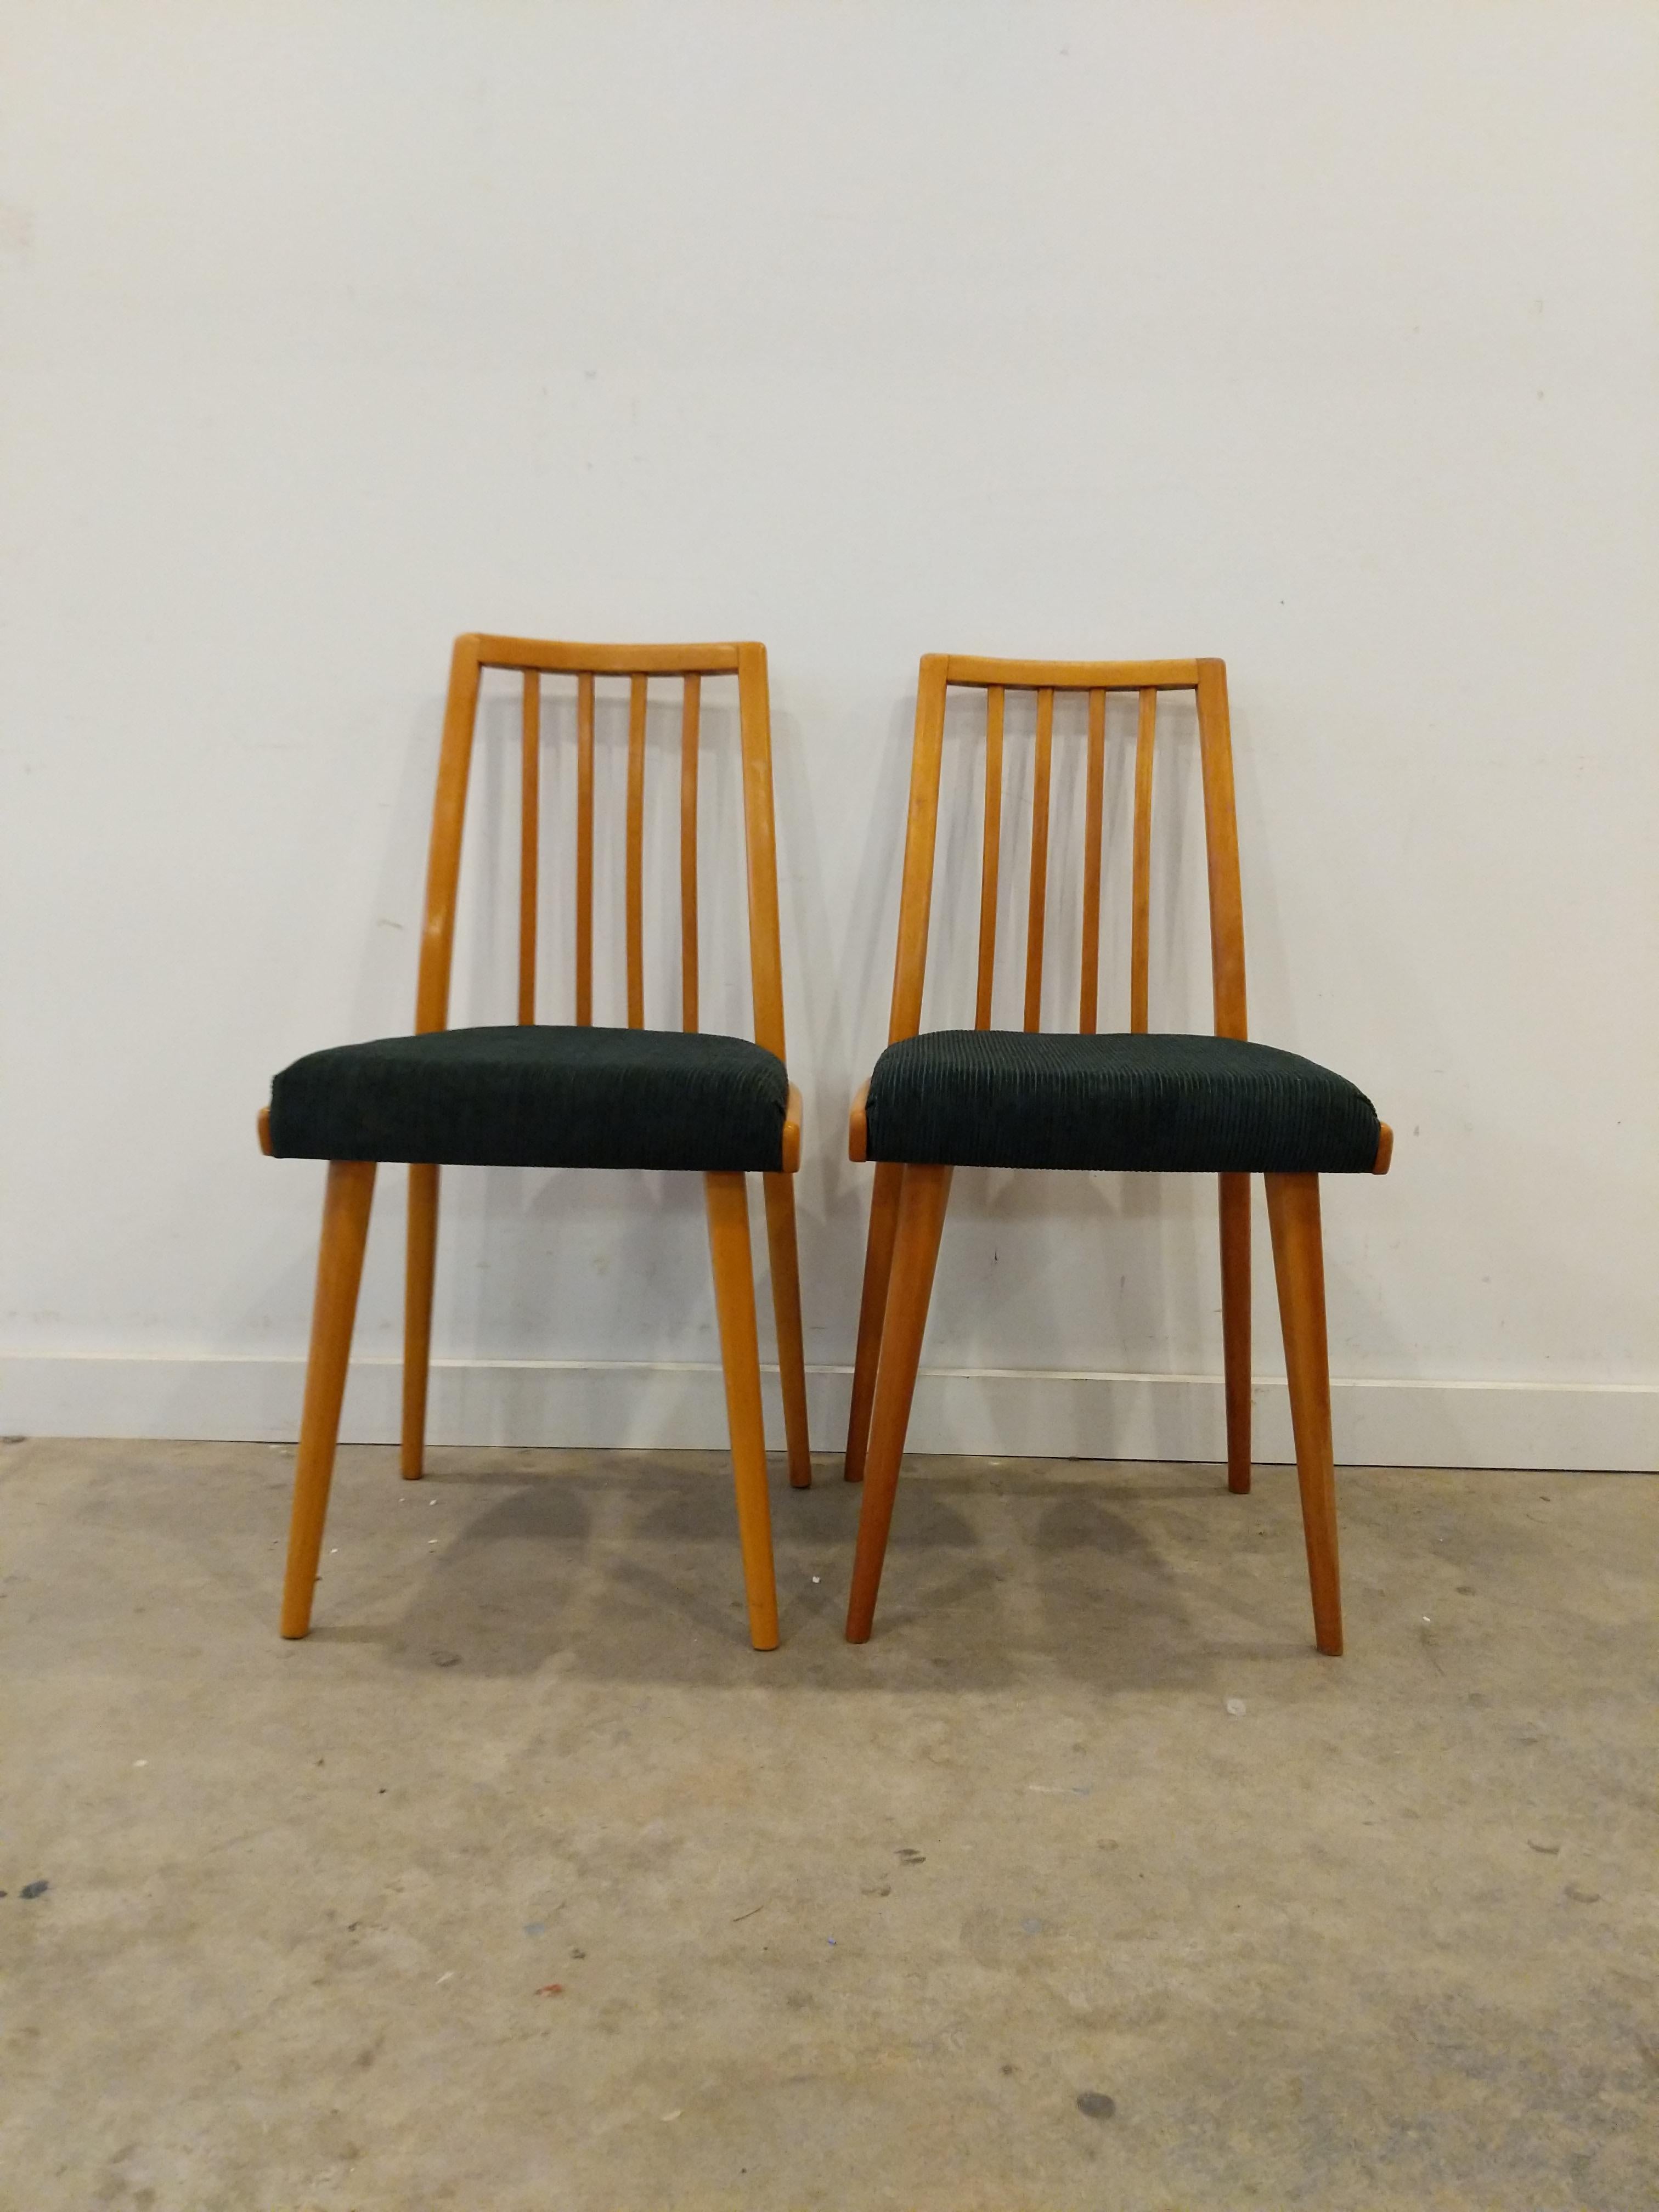 Pair of Vintage Czech Dining Chairs In Good Condition For Sale In Gardiner, NY